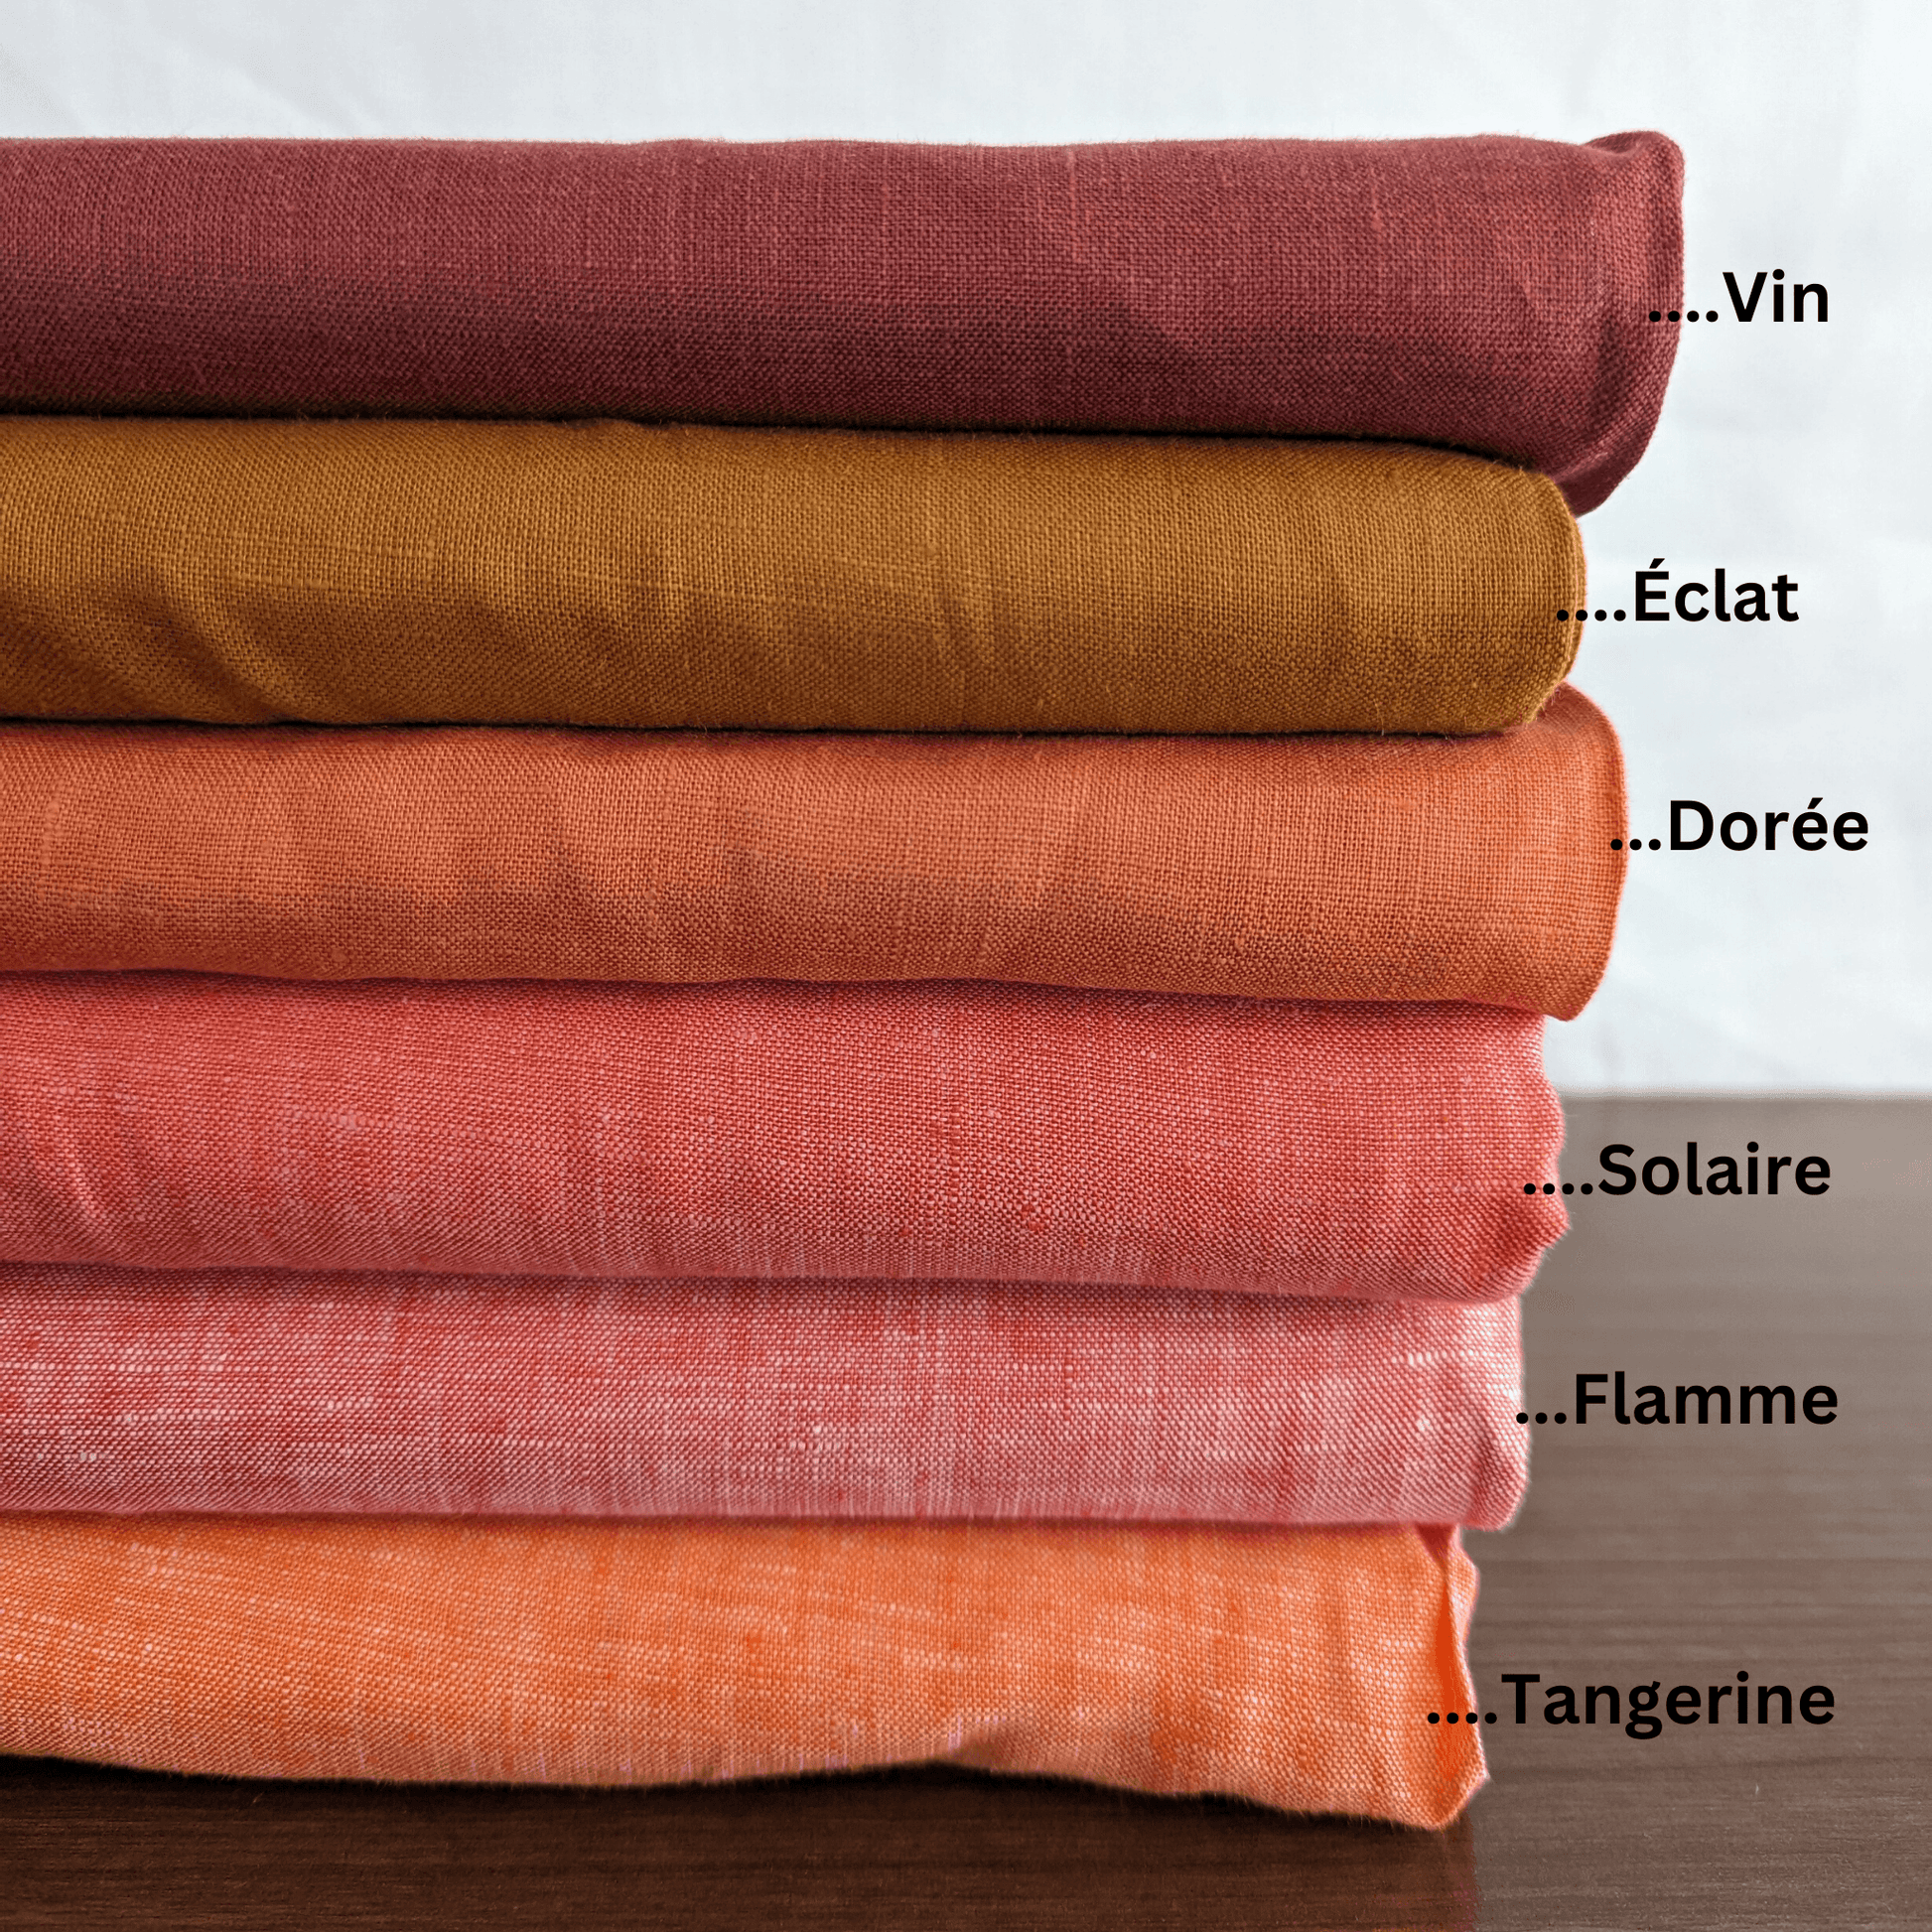 Warm Color Palette, Pure Linen Fabric, Used for Shirts, Dresses, Tops - OrganoLinen